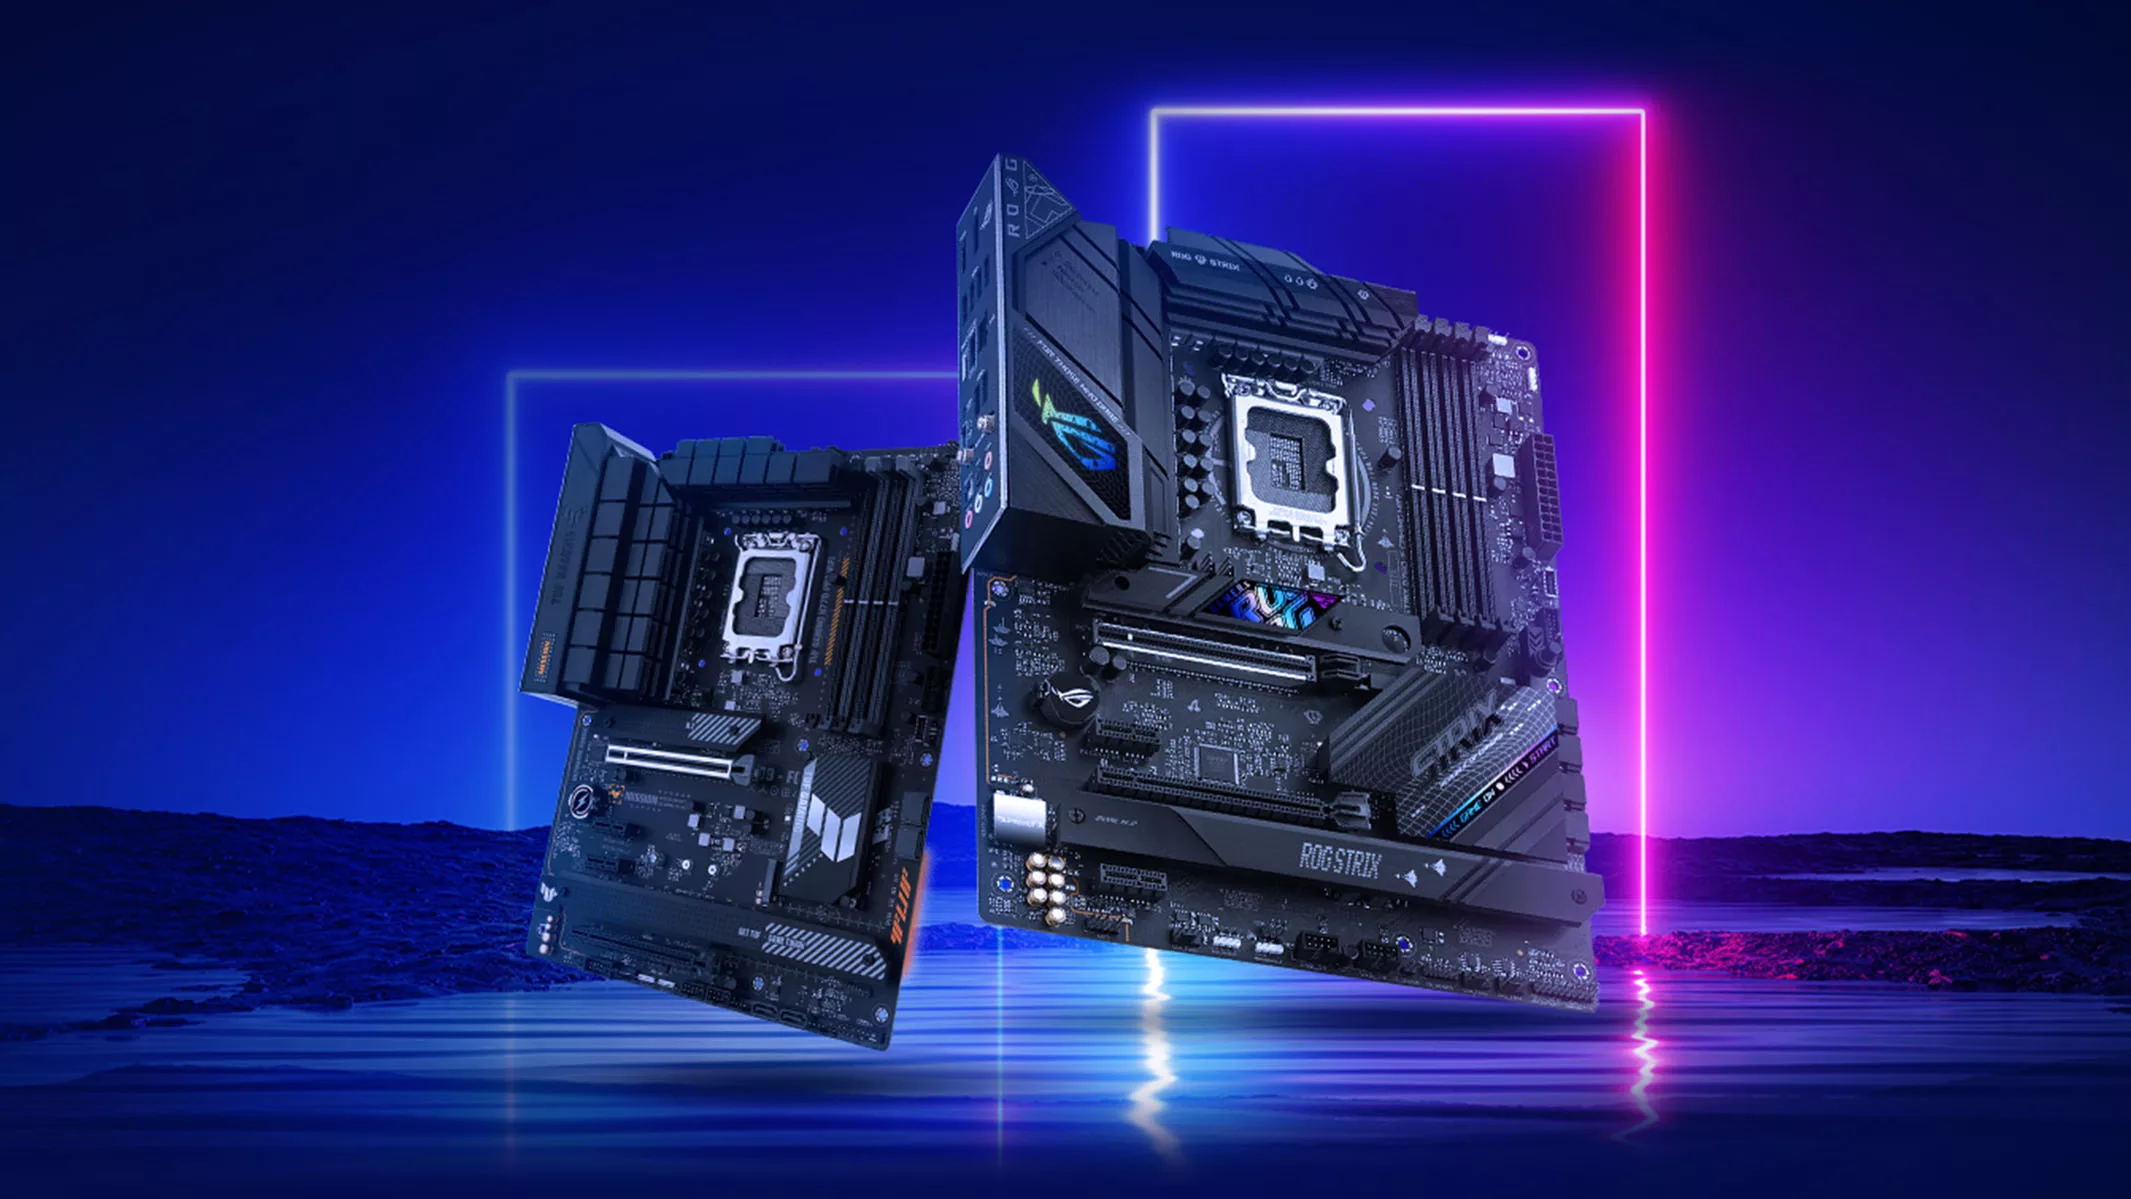 TUF Gaming and ROG Strix B760 motherboards across a futuristic background of neon lights.